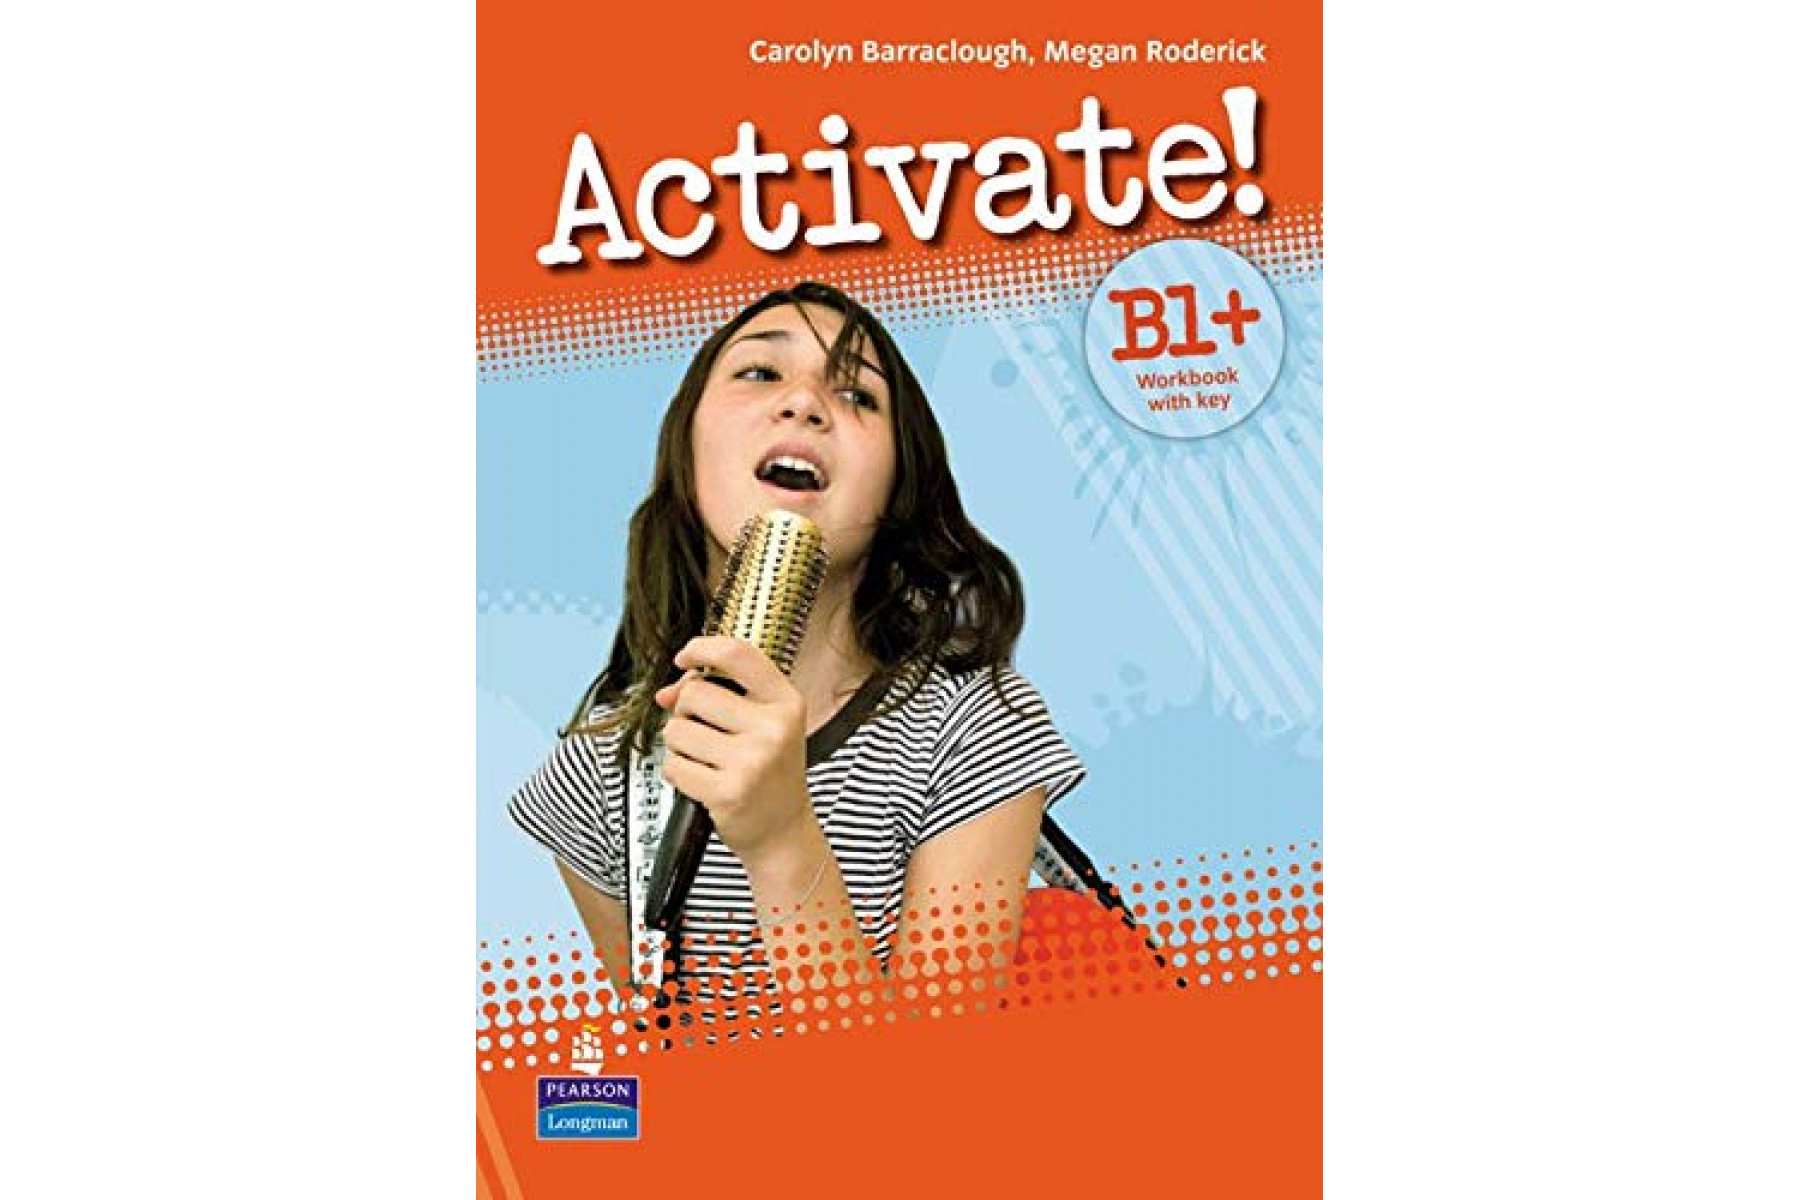 Activate! B1+: Workbook with Key/CD-Rom Pack